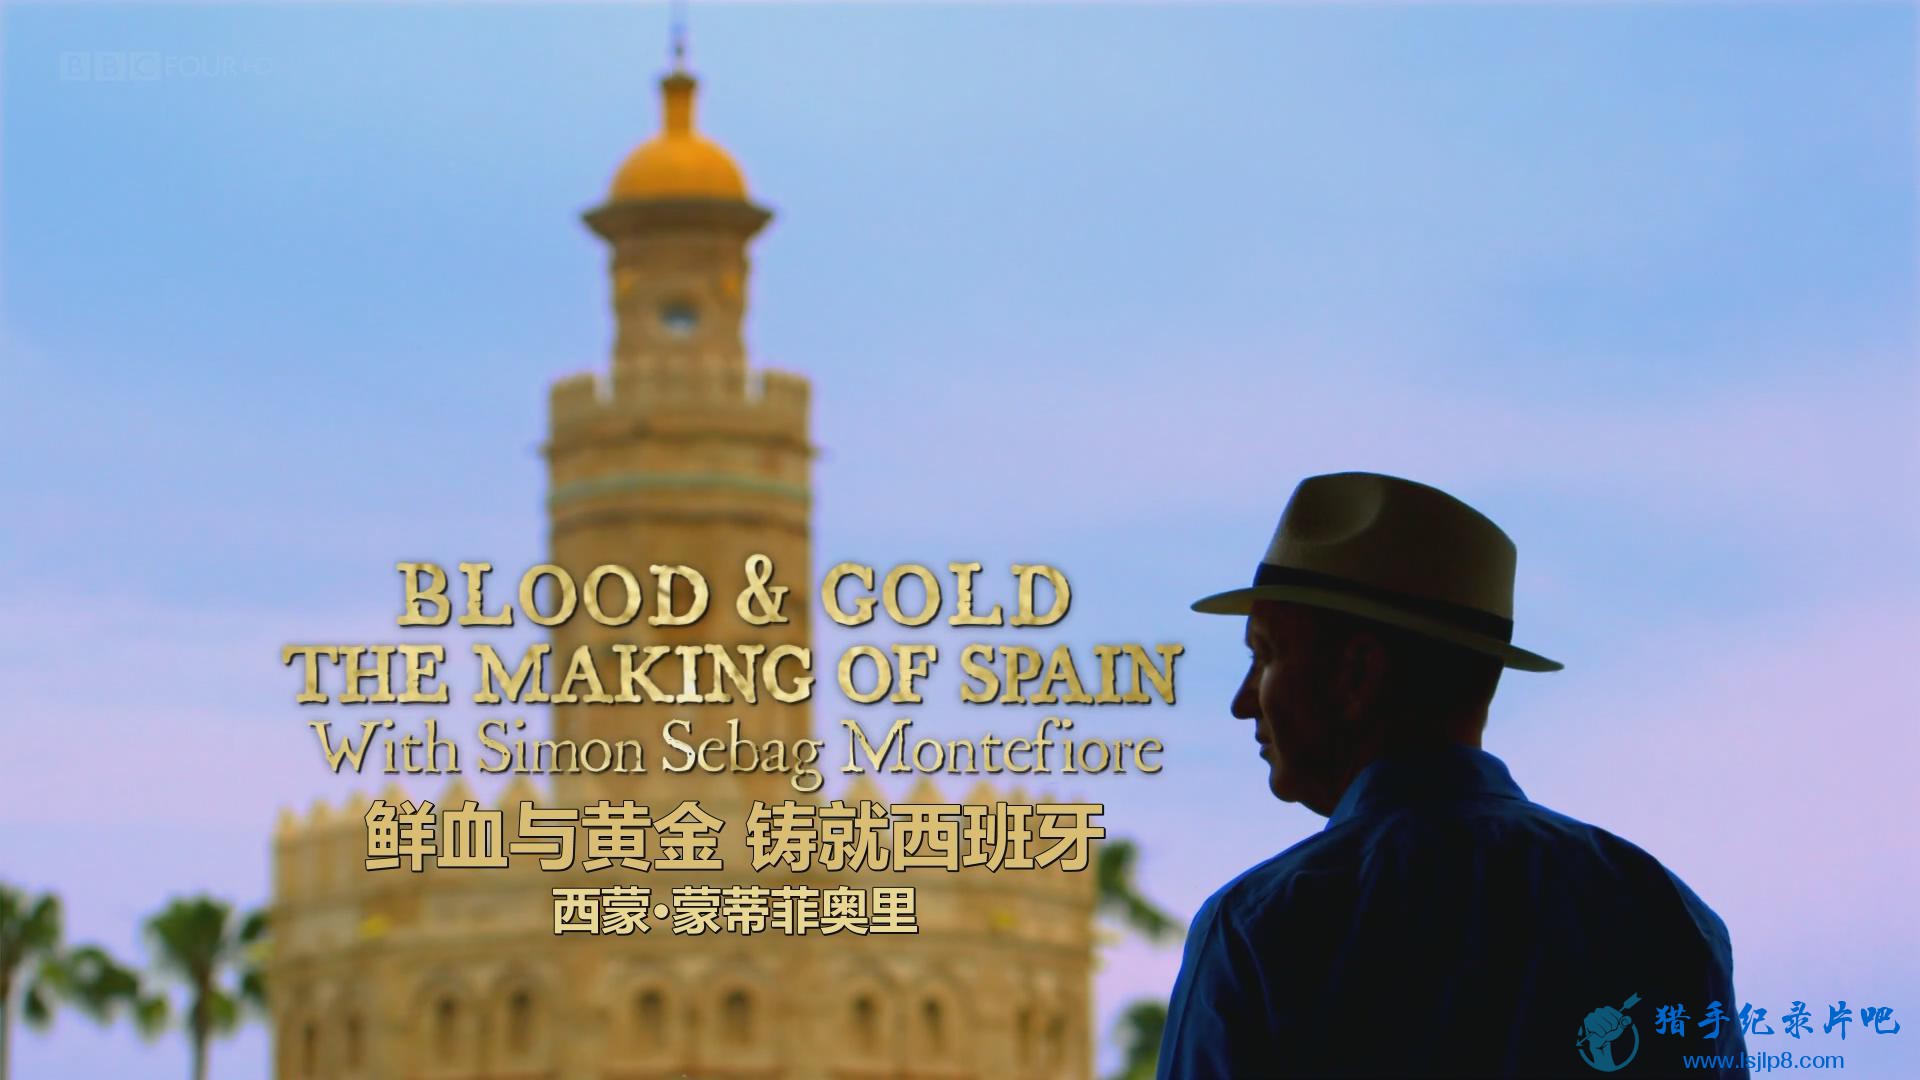 Blood.and.Gold.The.Making.of.Spain.1of3.Conquest.1080p.x264.HDTV[eztv]_20180607191421.JPG